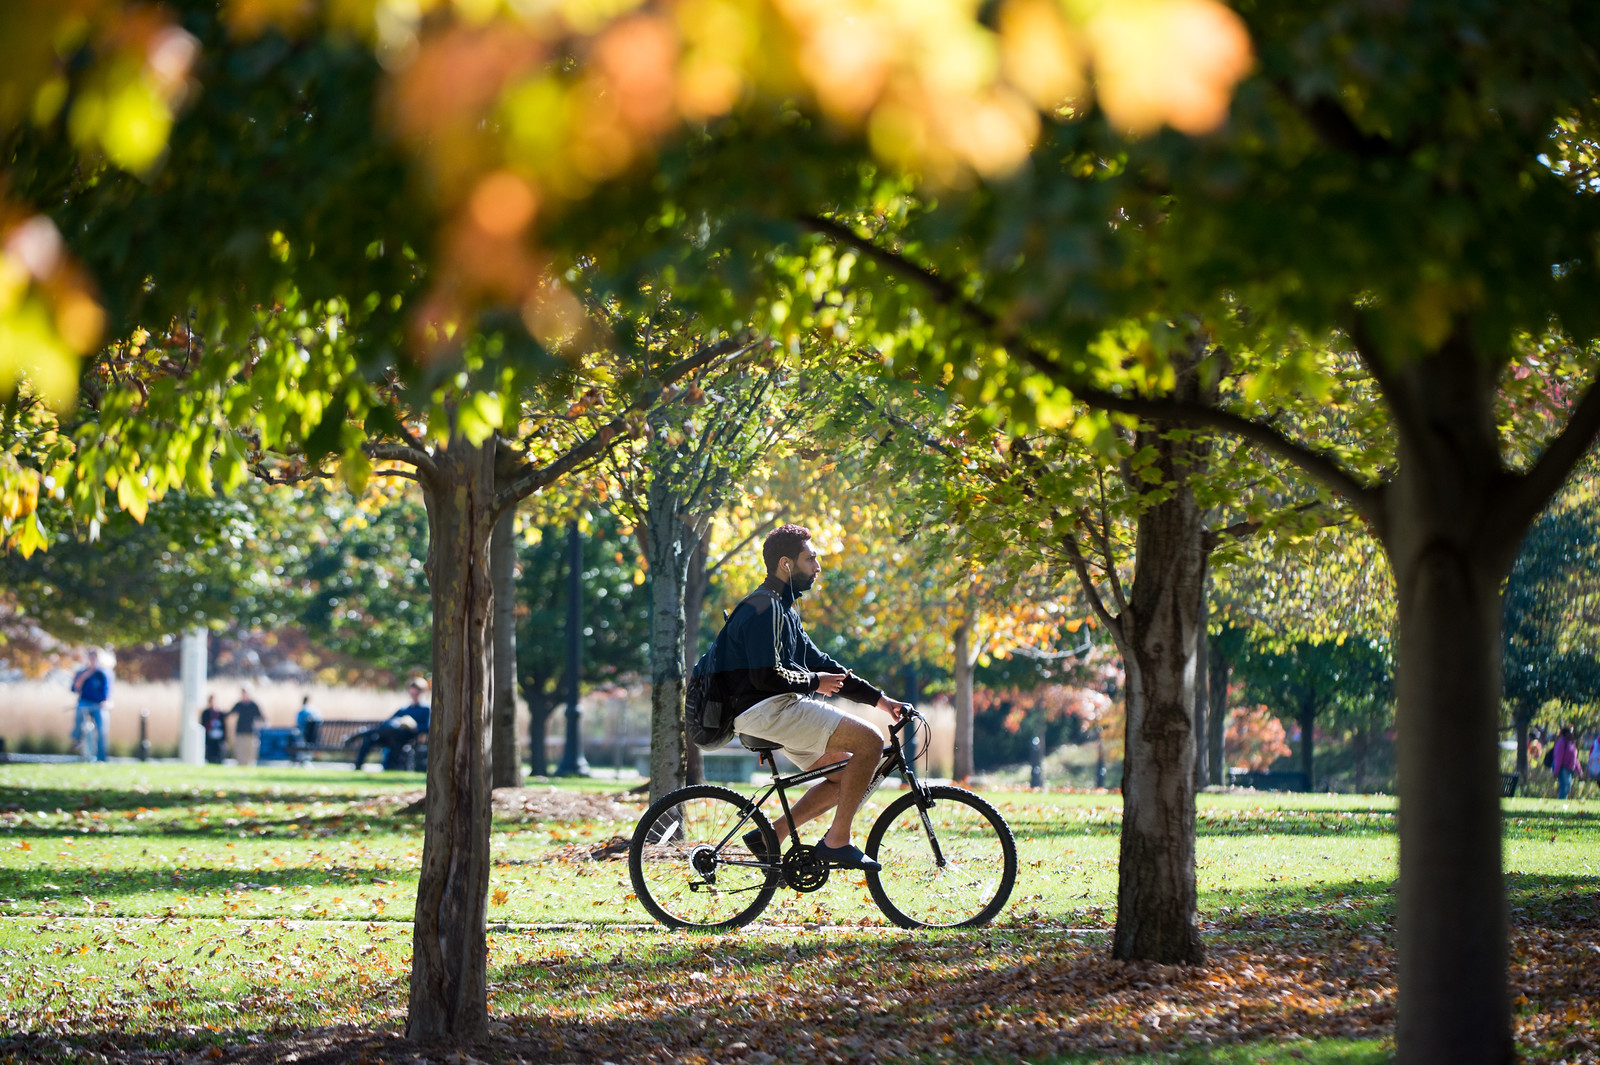 An image of fall trees and grass underneath with a person on a bicycle riding through the center of the picture